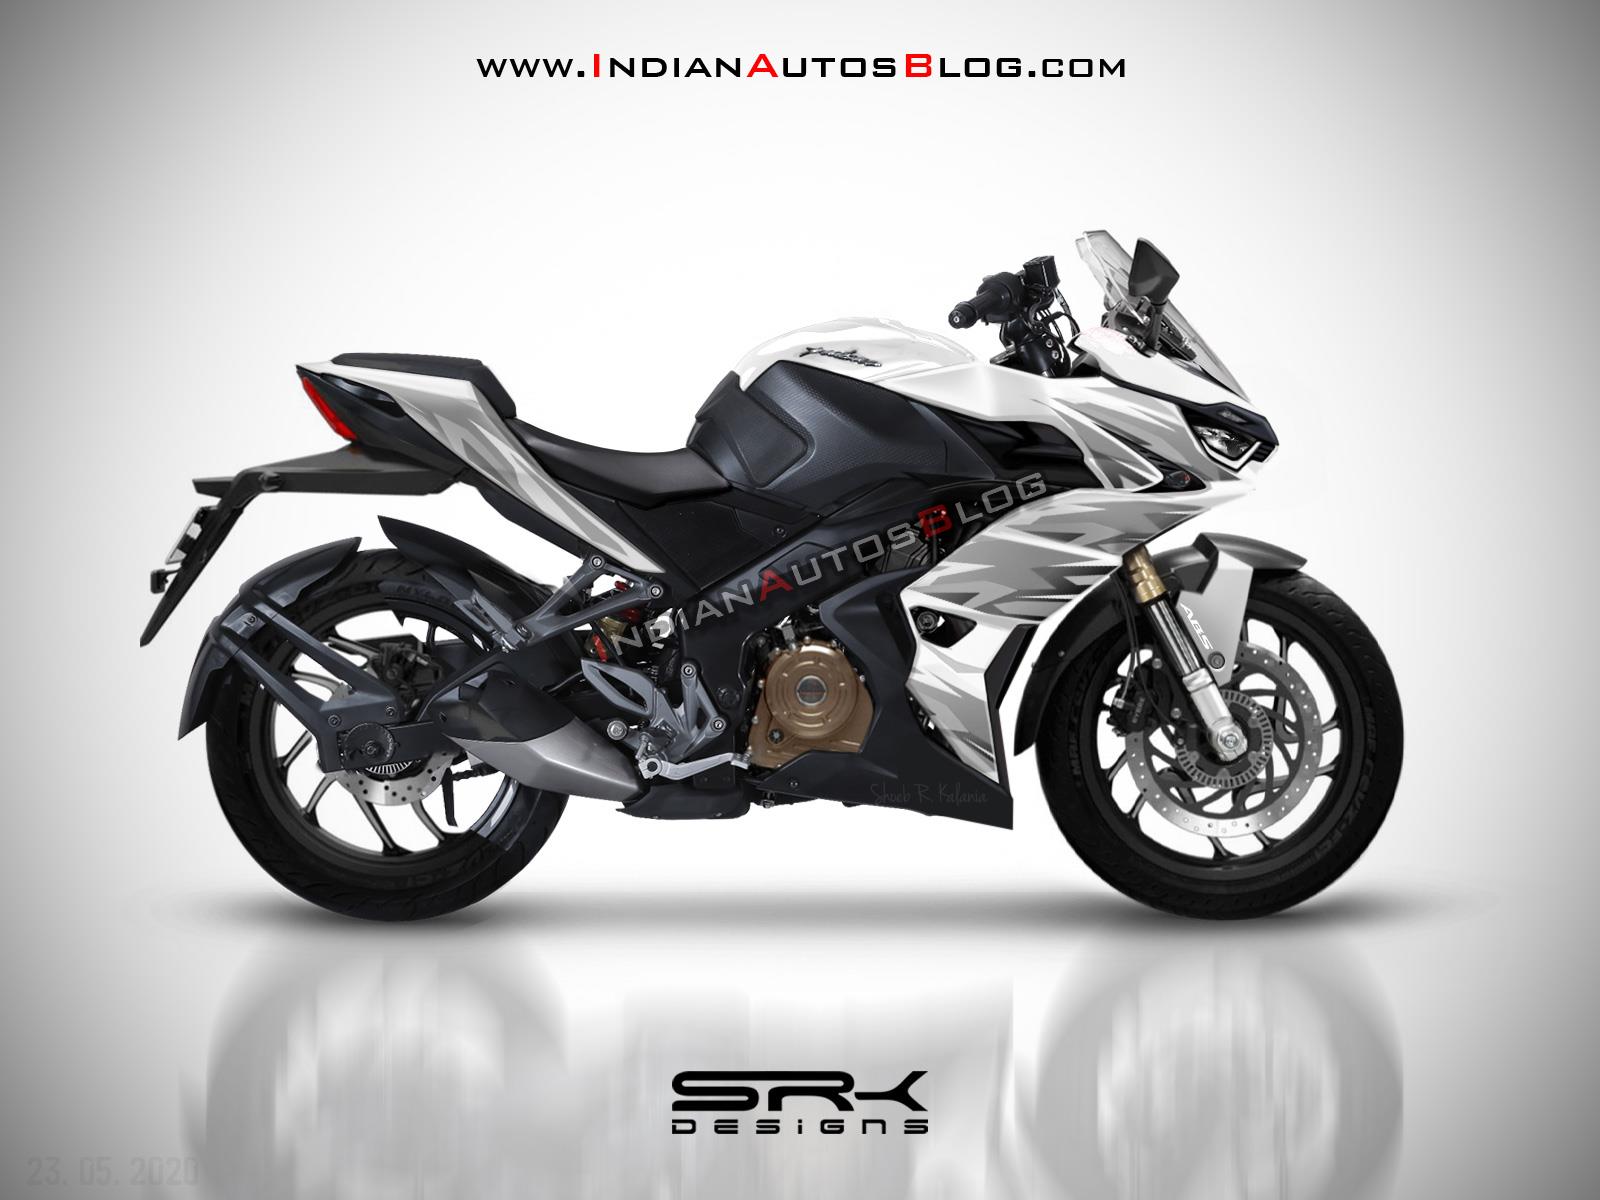 2024 Bajaj Pulsar RS400 Specifications and Expected Price in India